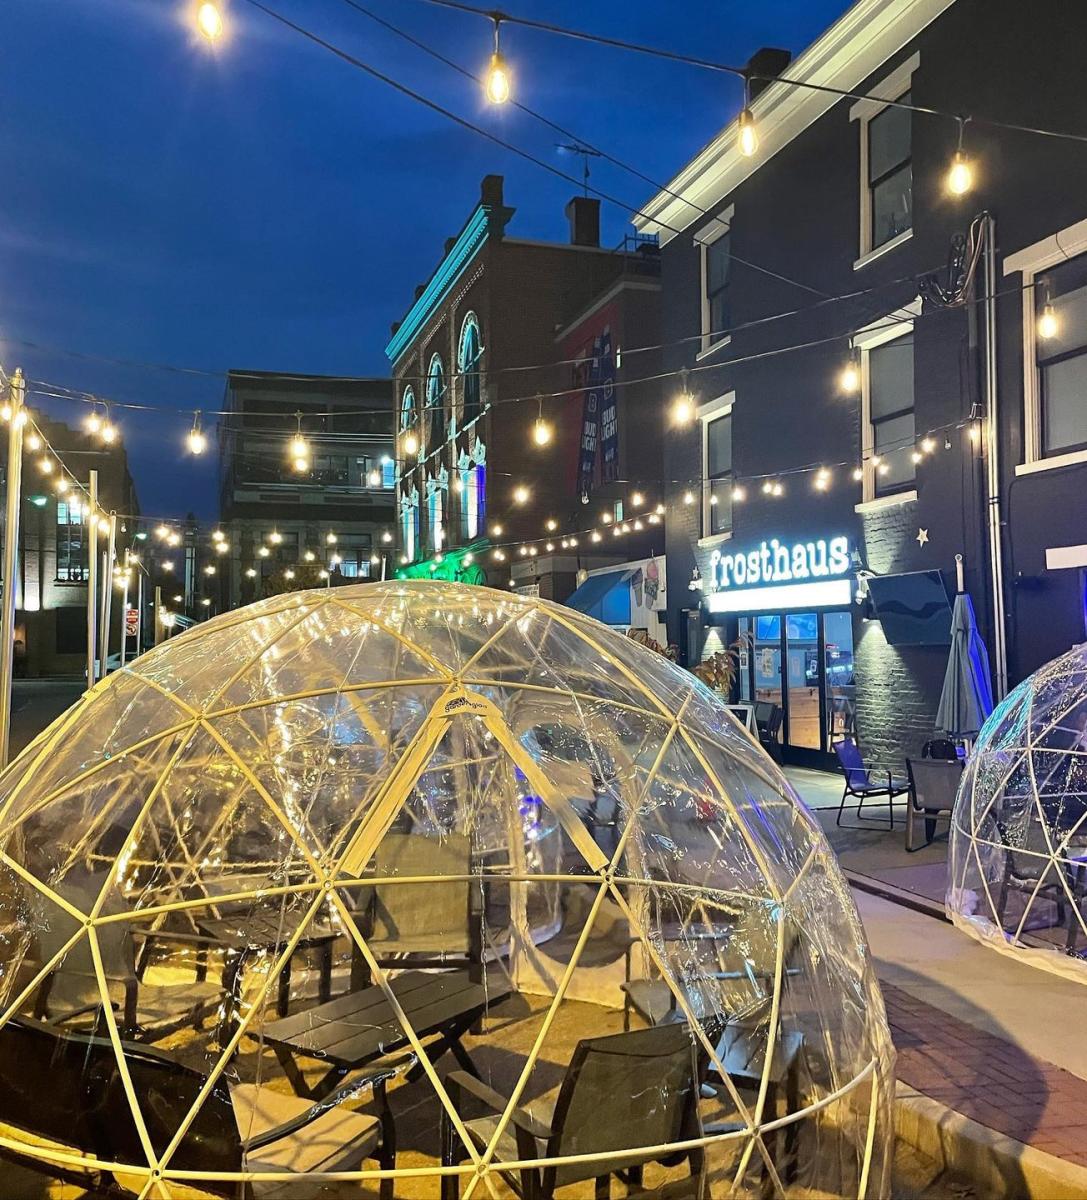 Plastic igloos for outdoor dining at Frosthaus in Covington, Ky